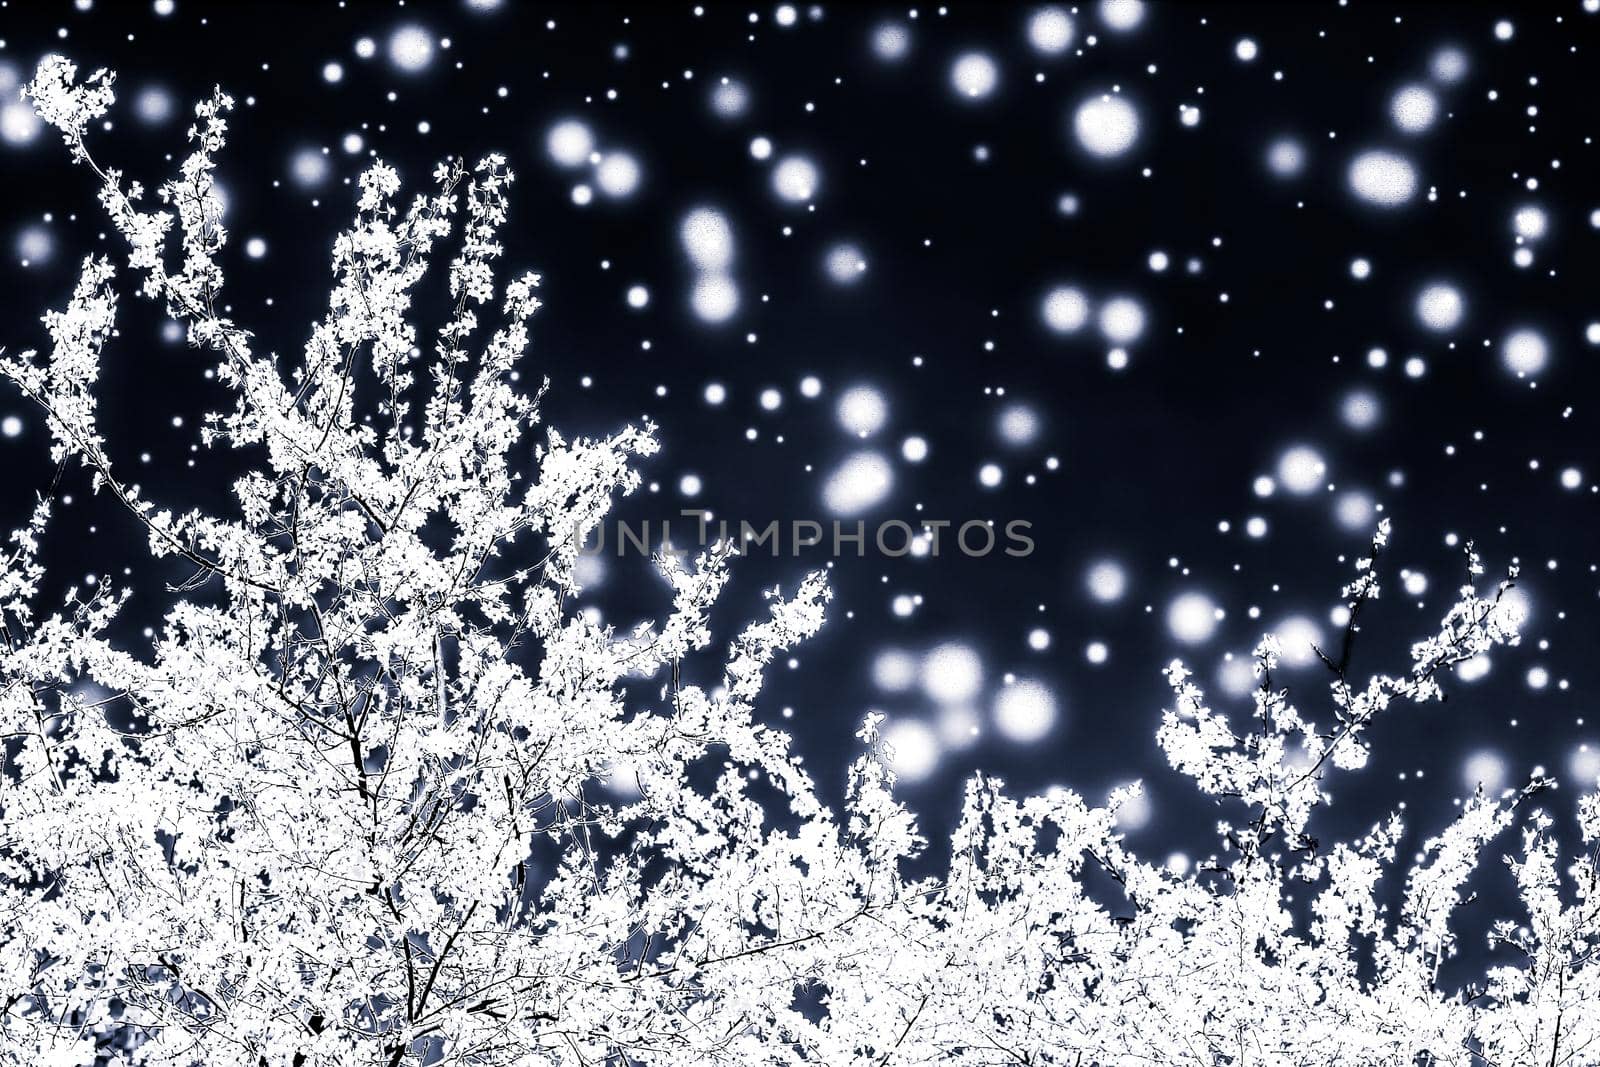 Branding, magic and festive concept - Christmas, New Years black floral background, holiday card design, flower tree and snow glitter as winter season sale promotion backdrop for luxury beauty brand